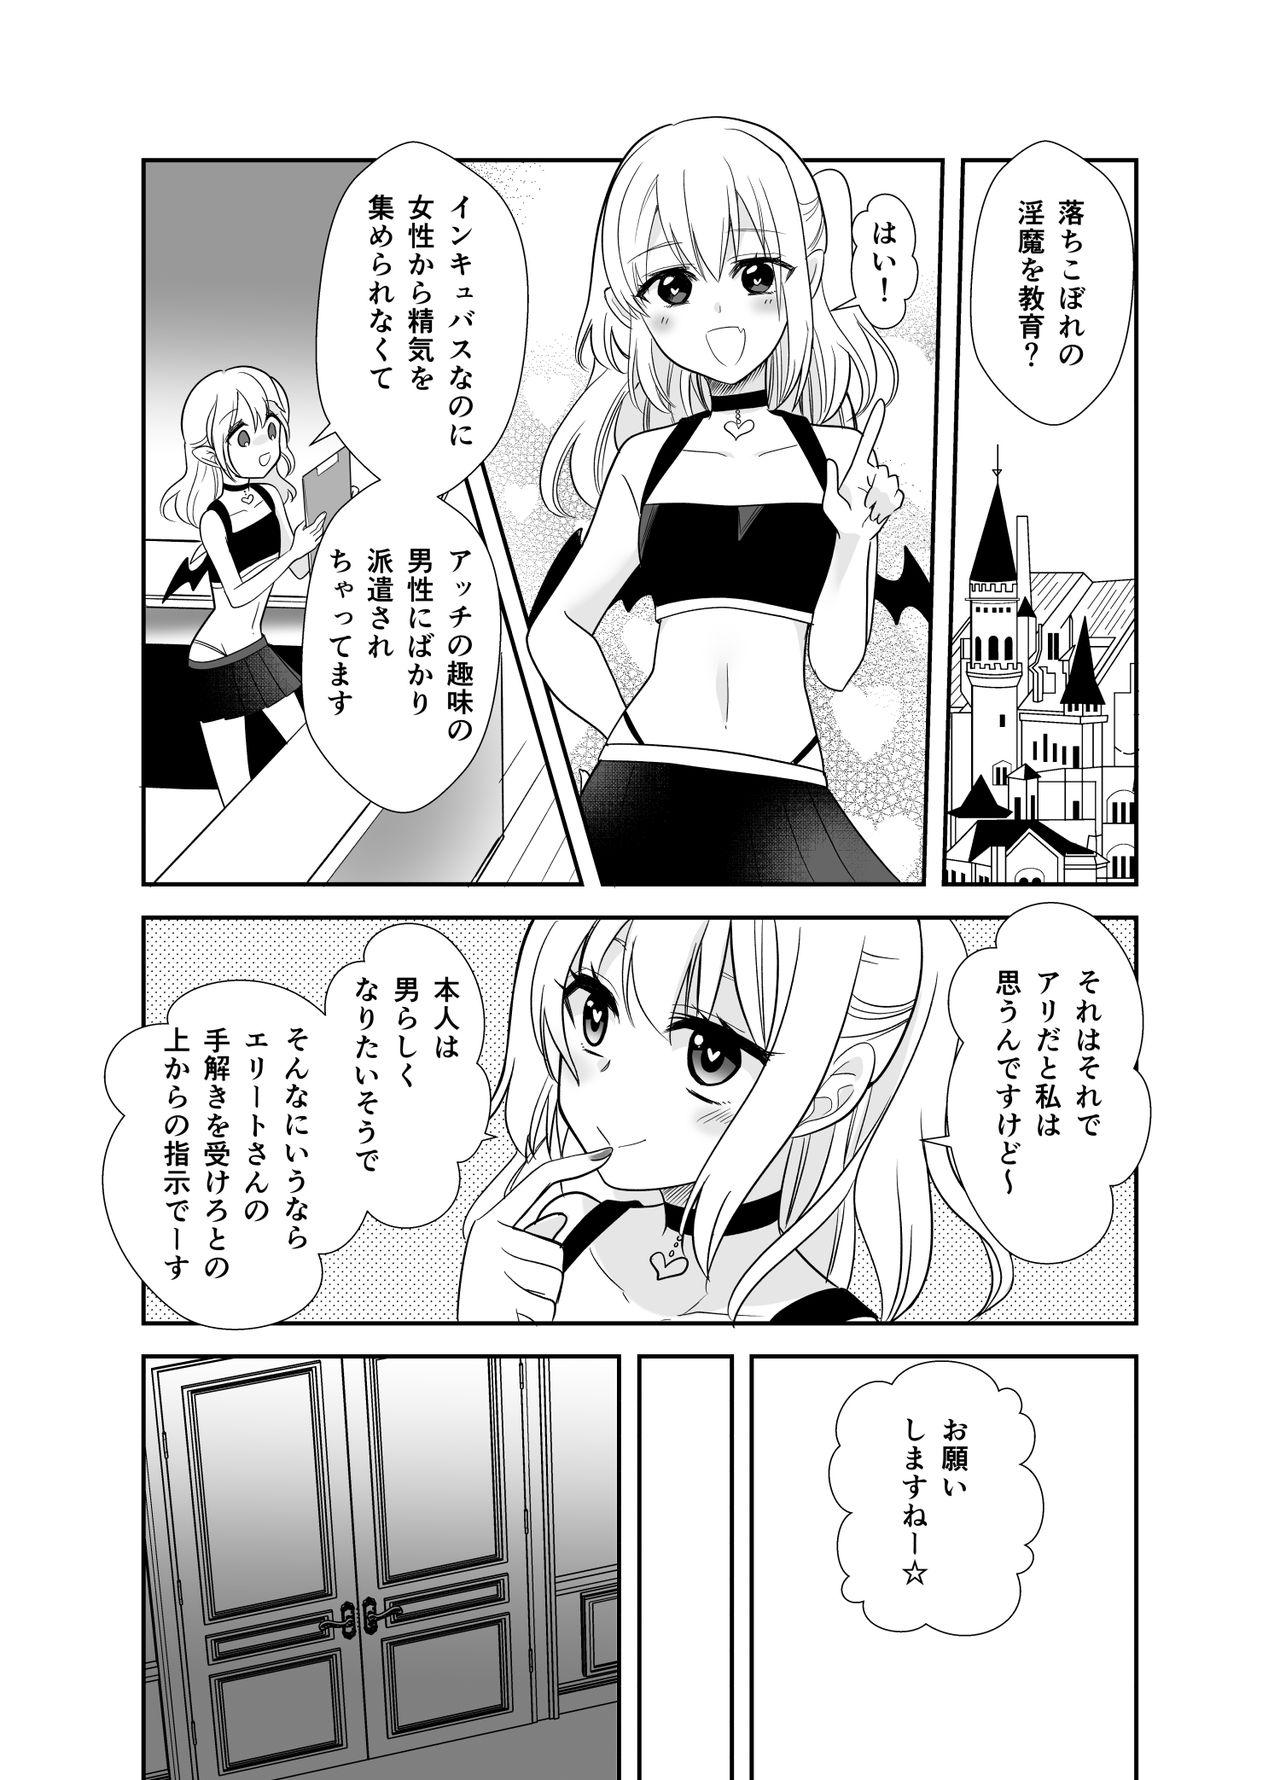 Parody 転生したらエリート淫魔でした - Original Transsexual - Page 3